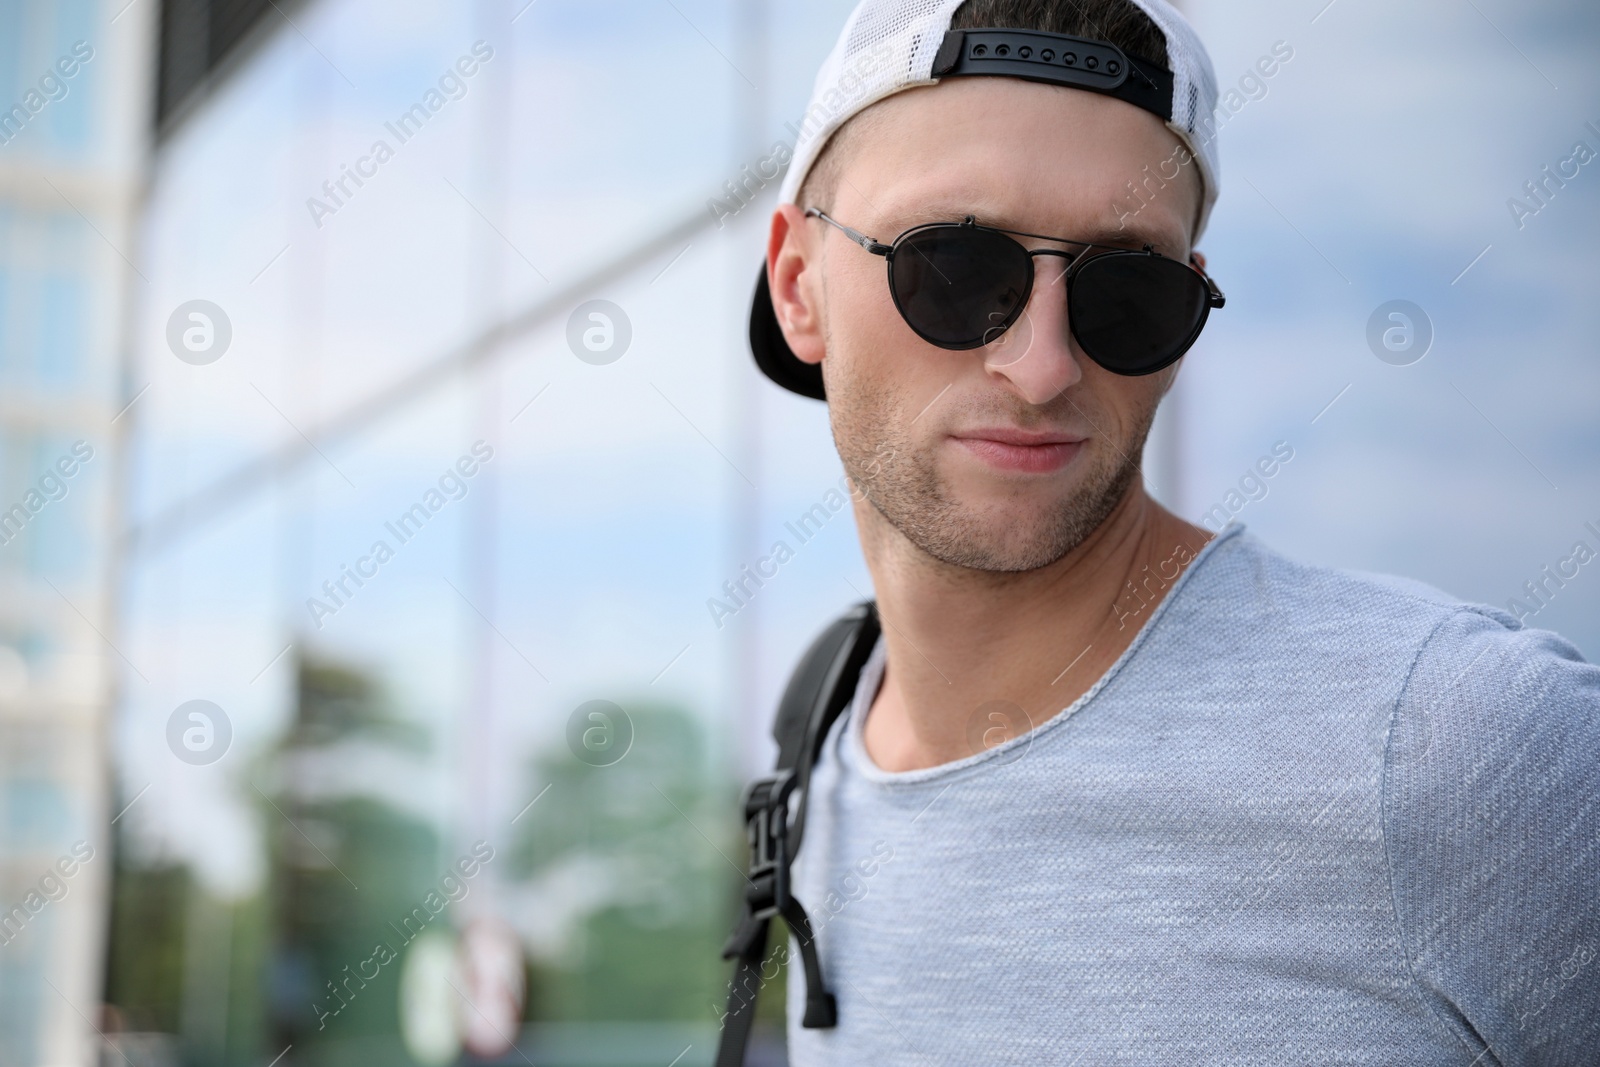 Photo of Handsome young man with stylish sunglasses and backpack near reflection surface outdoors, space for text